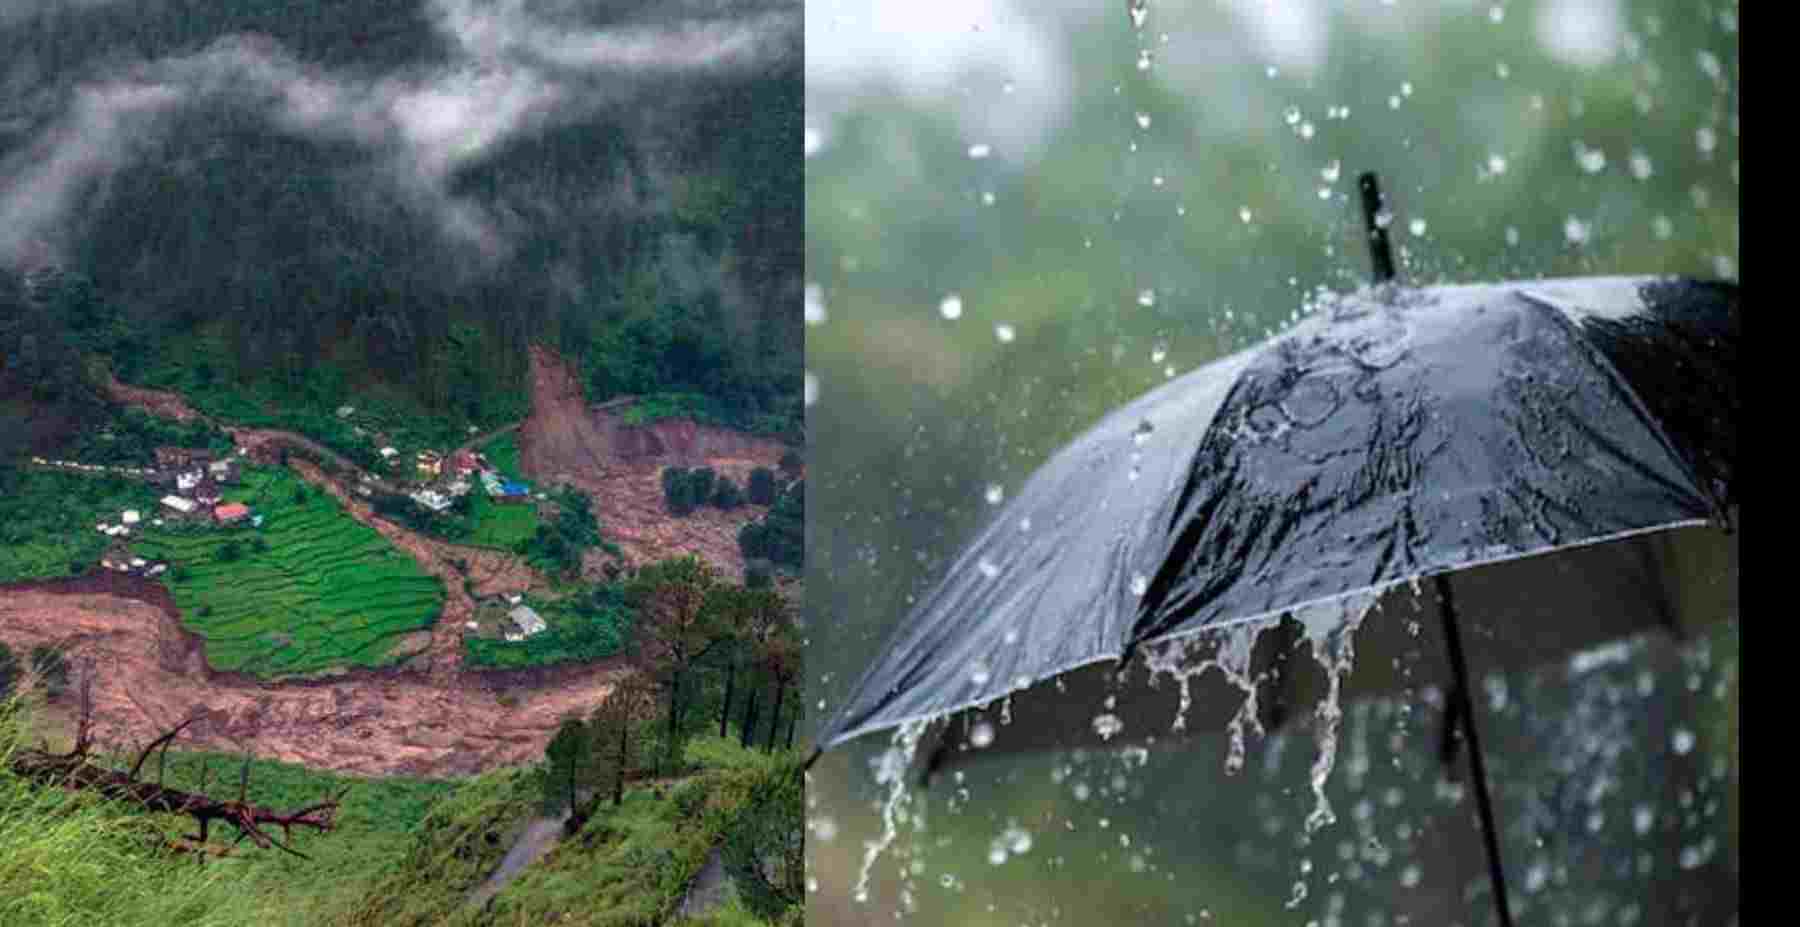 Uttarakhand news today: Alert issued for rain and hailstorm in 5 districts, also warned of avalanche.